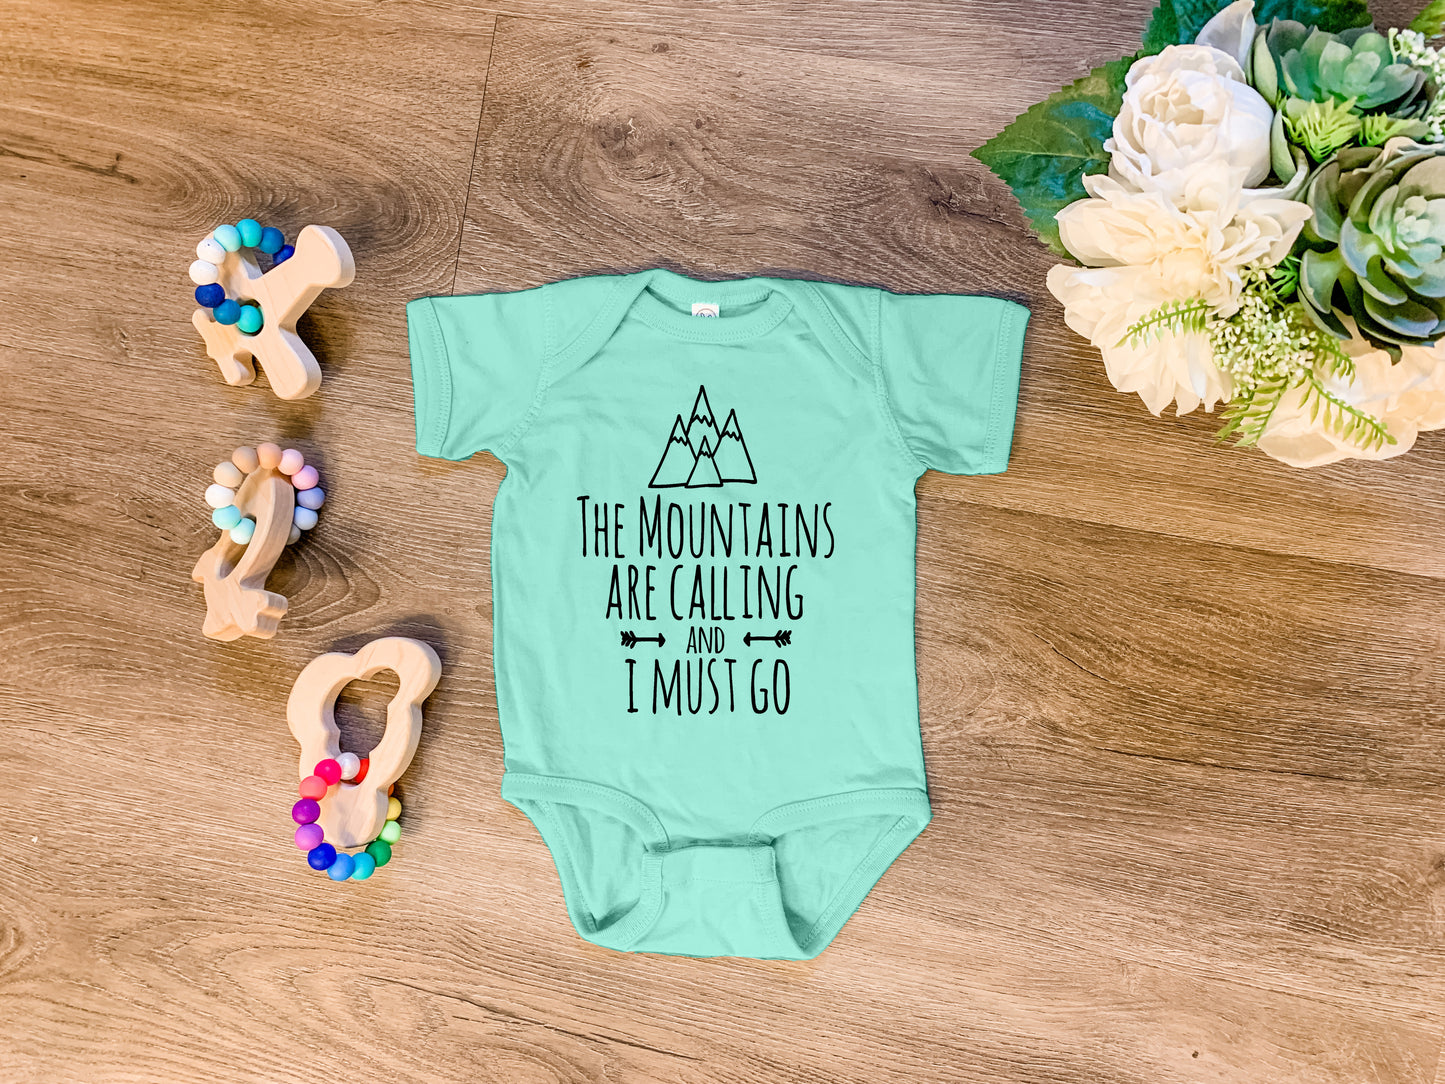 The Mountains Are Calling And I Must Go - Onesie - Heather Gray, Chill, or Lavender